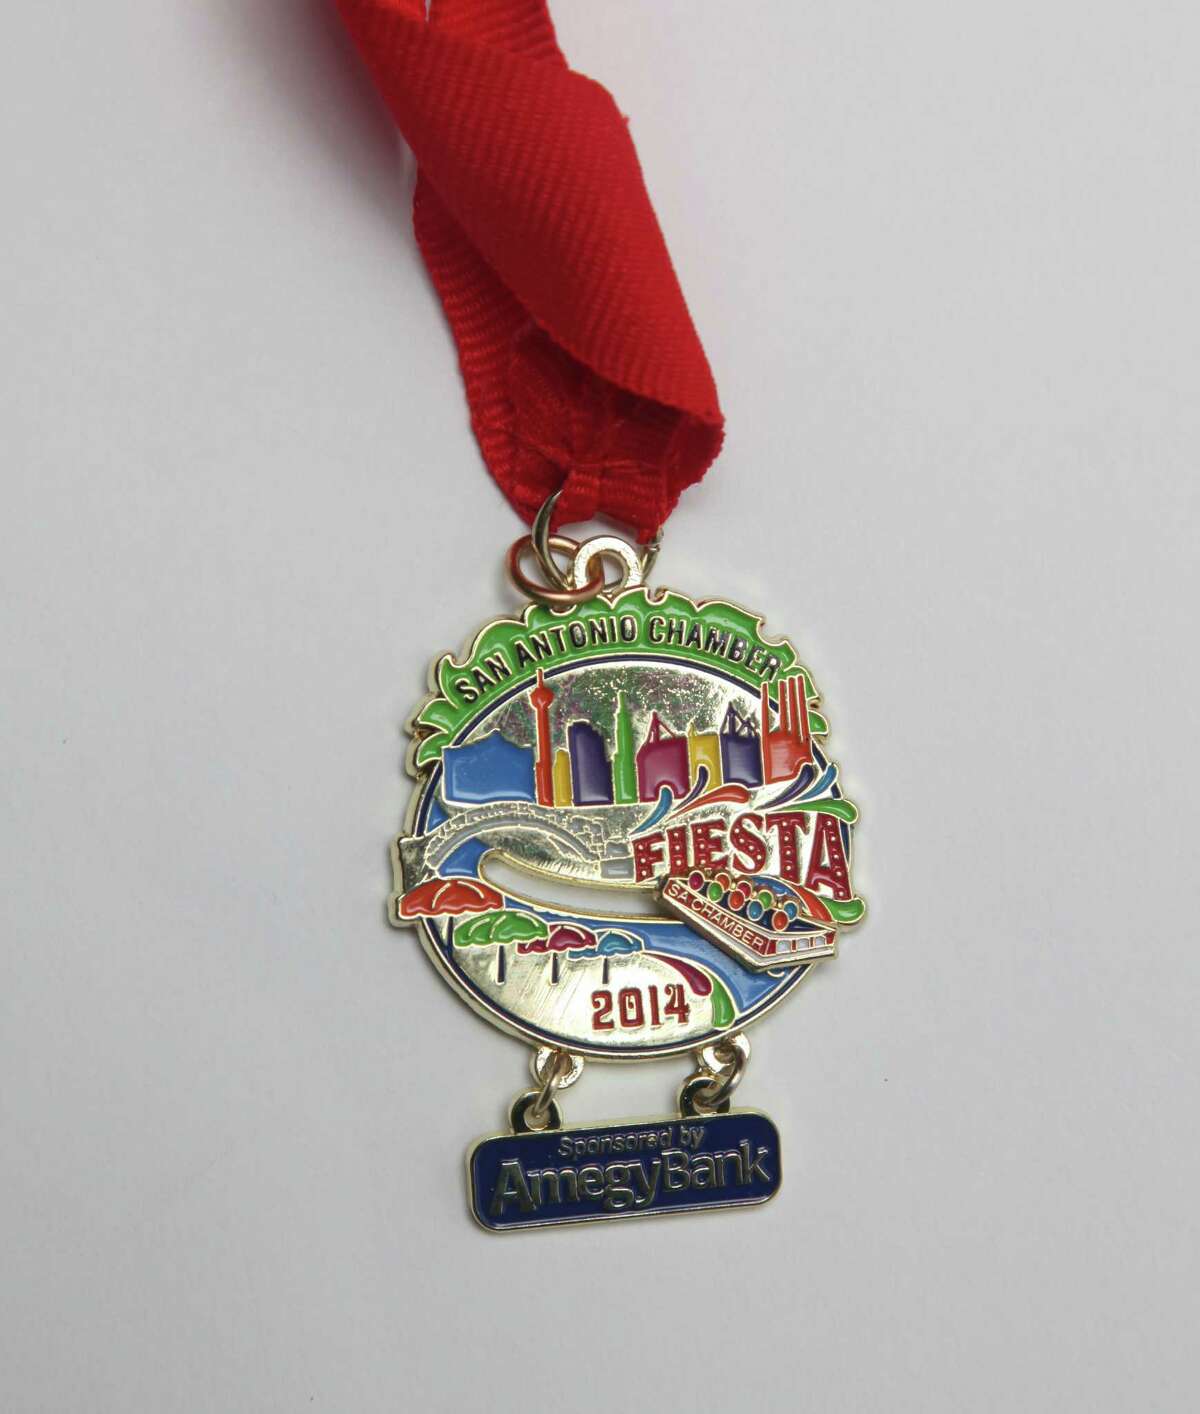 Fiesta medal craze growing — and morphing